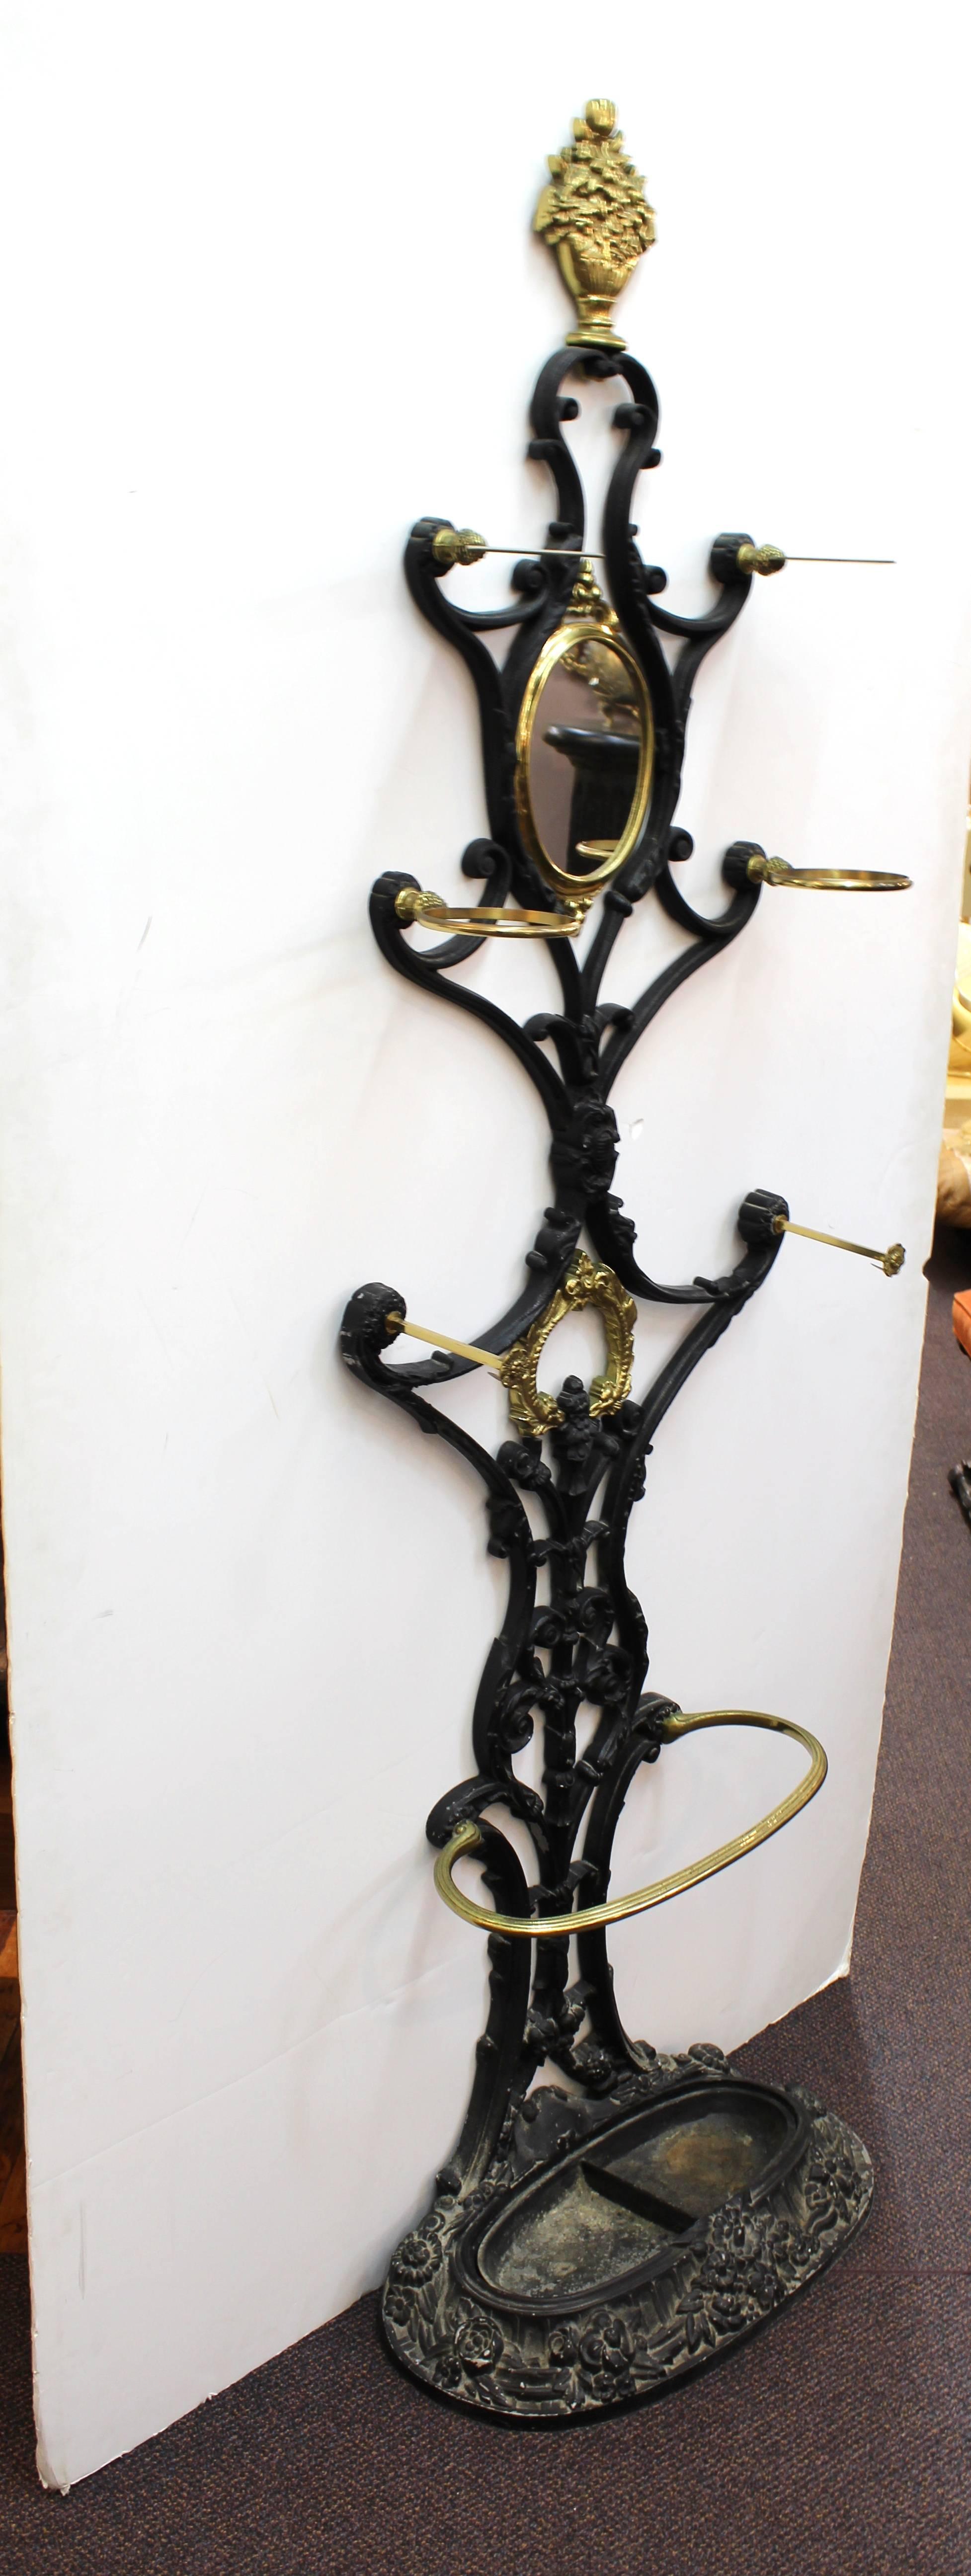 Tall hall tree in black metal with brass details. Includes six hooks in brass and an umbrella stand at the base. Decorated with acanthus leaves, rosettes and a potted bouquet at the top. Wear appropriate to age and use. The hall tree is in good